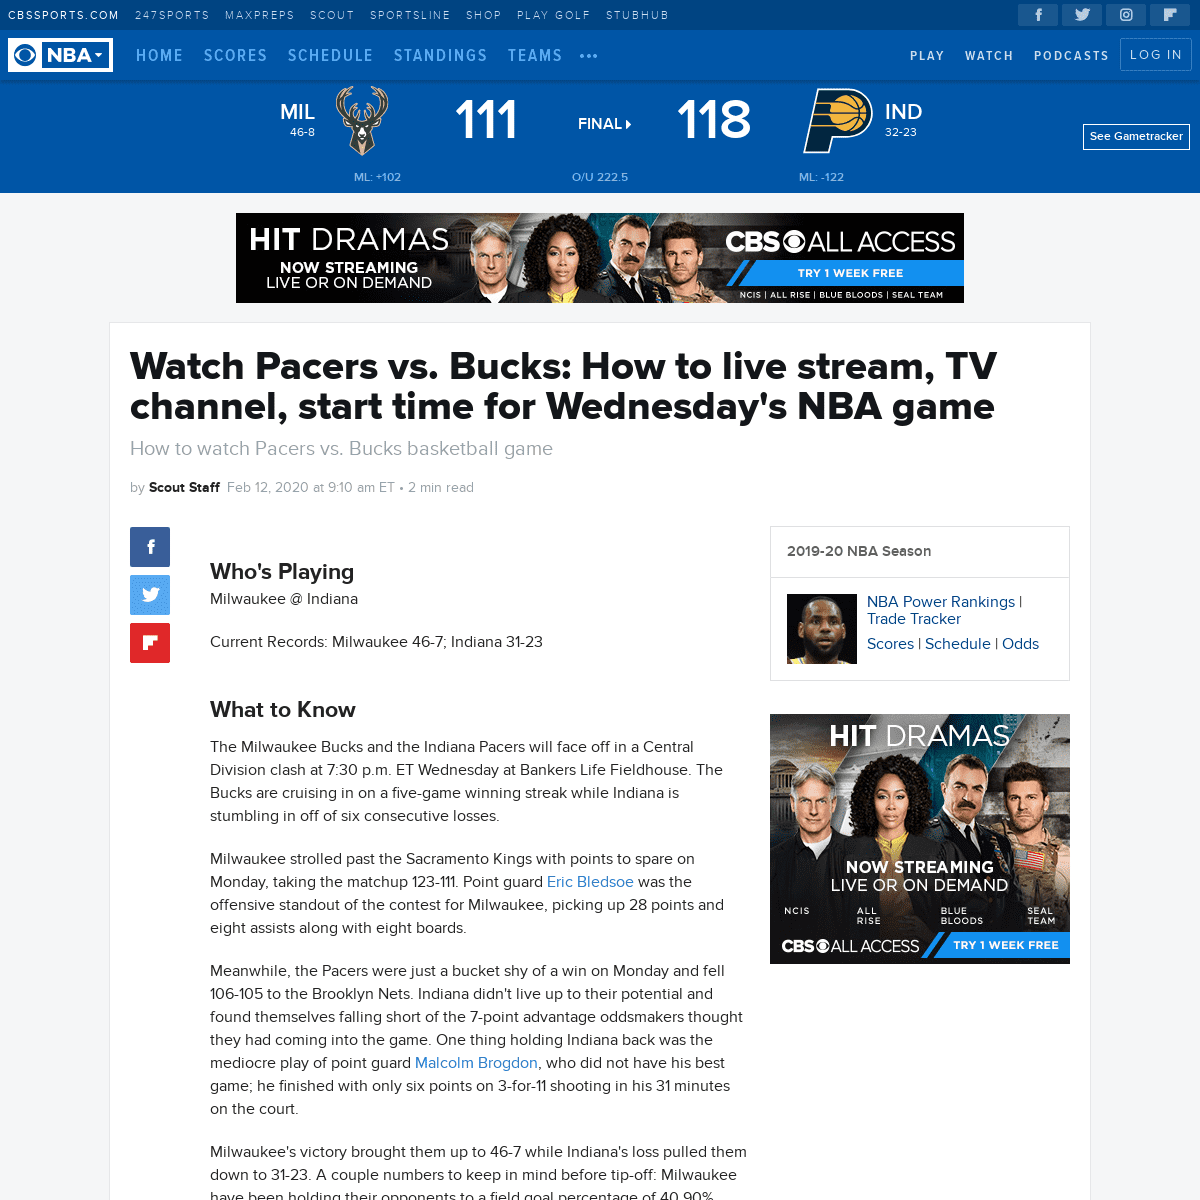 A complete backup of www.cbssports.com/nba/news/watch-pacers-vs-bucks-how-to-live-stream-tv-channel-start-time-for-wednesdays-nb